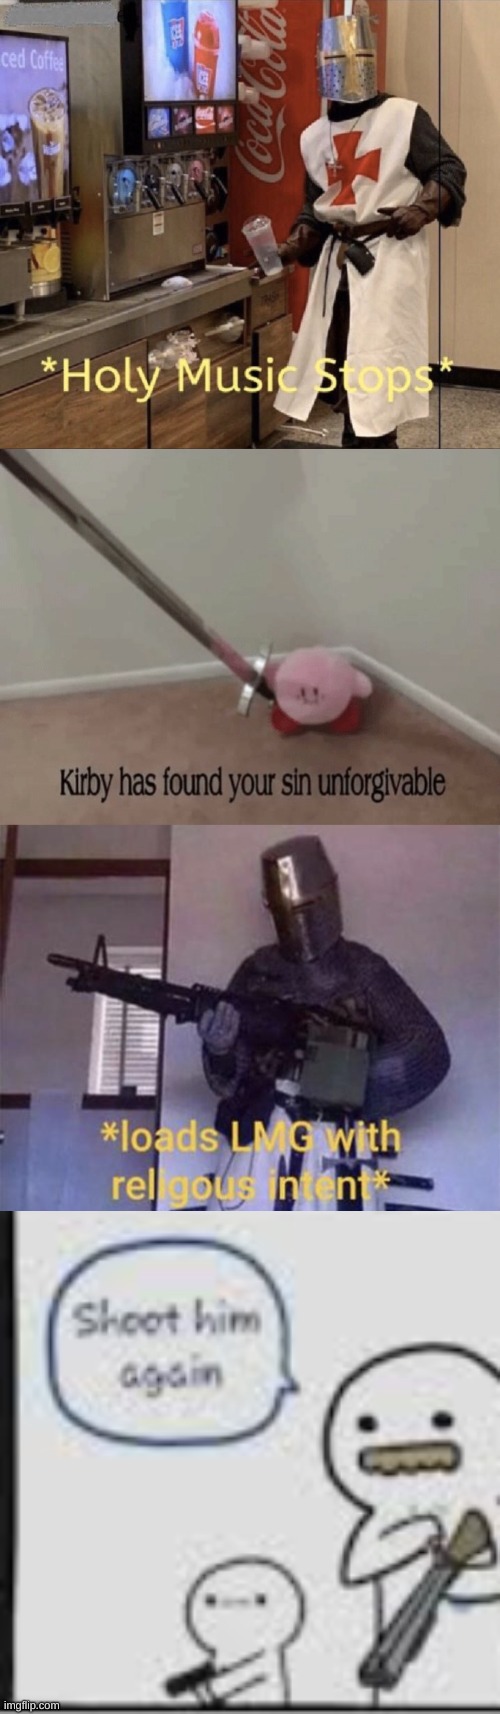 image tagged in holy music stops,kirby has found your sin unforgivable,loads lmg with religious intent,shoot him again billy | made w/ Imgflip meme maker